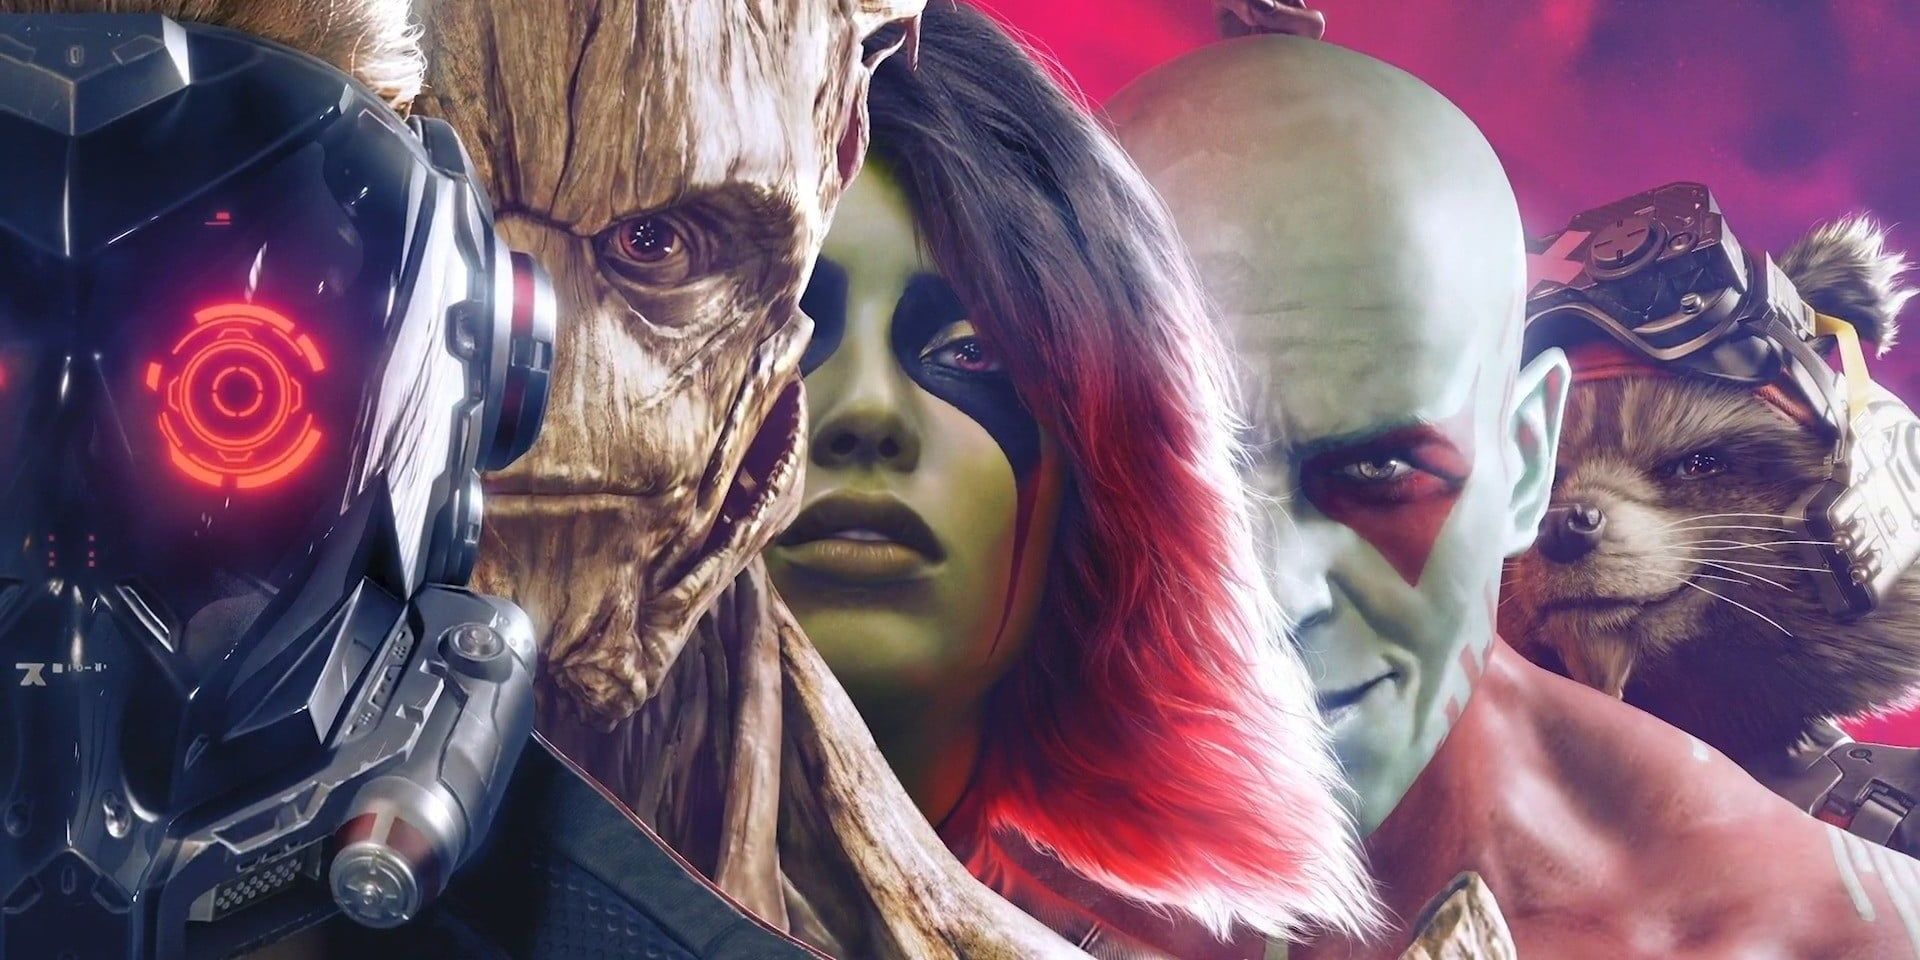 The lineup of main characters in the new Guardians of the Galaxy game from Square Enix